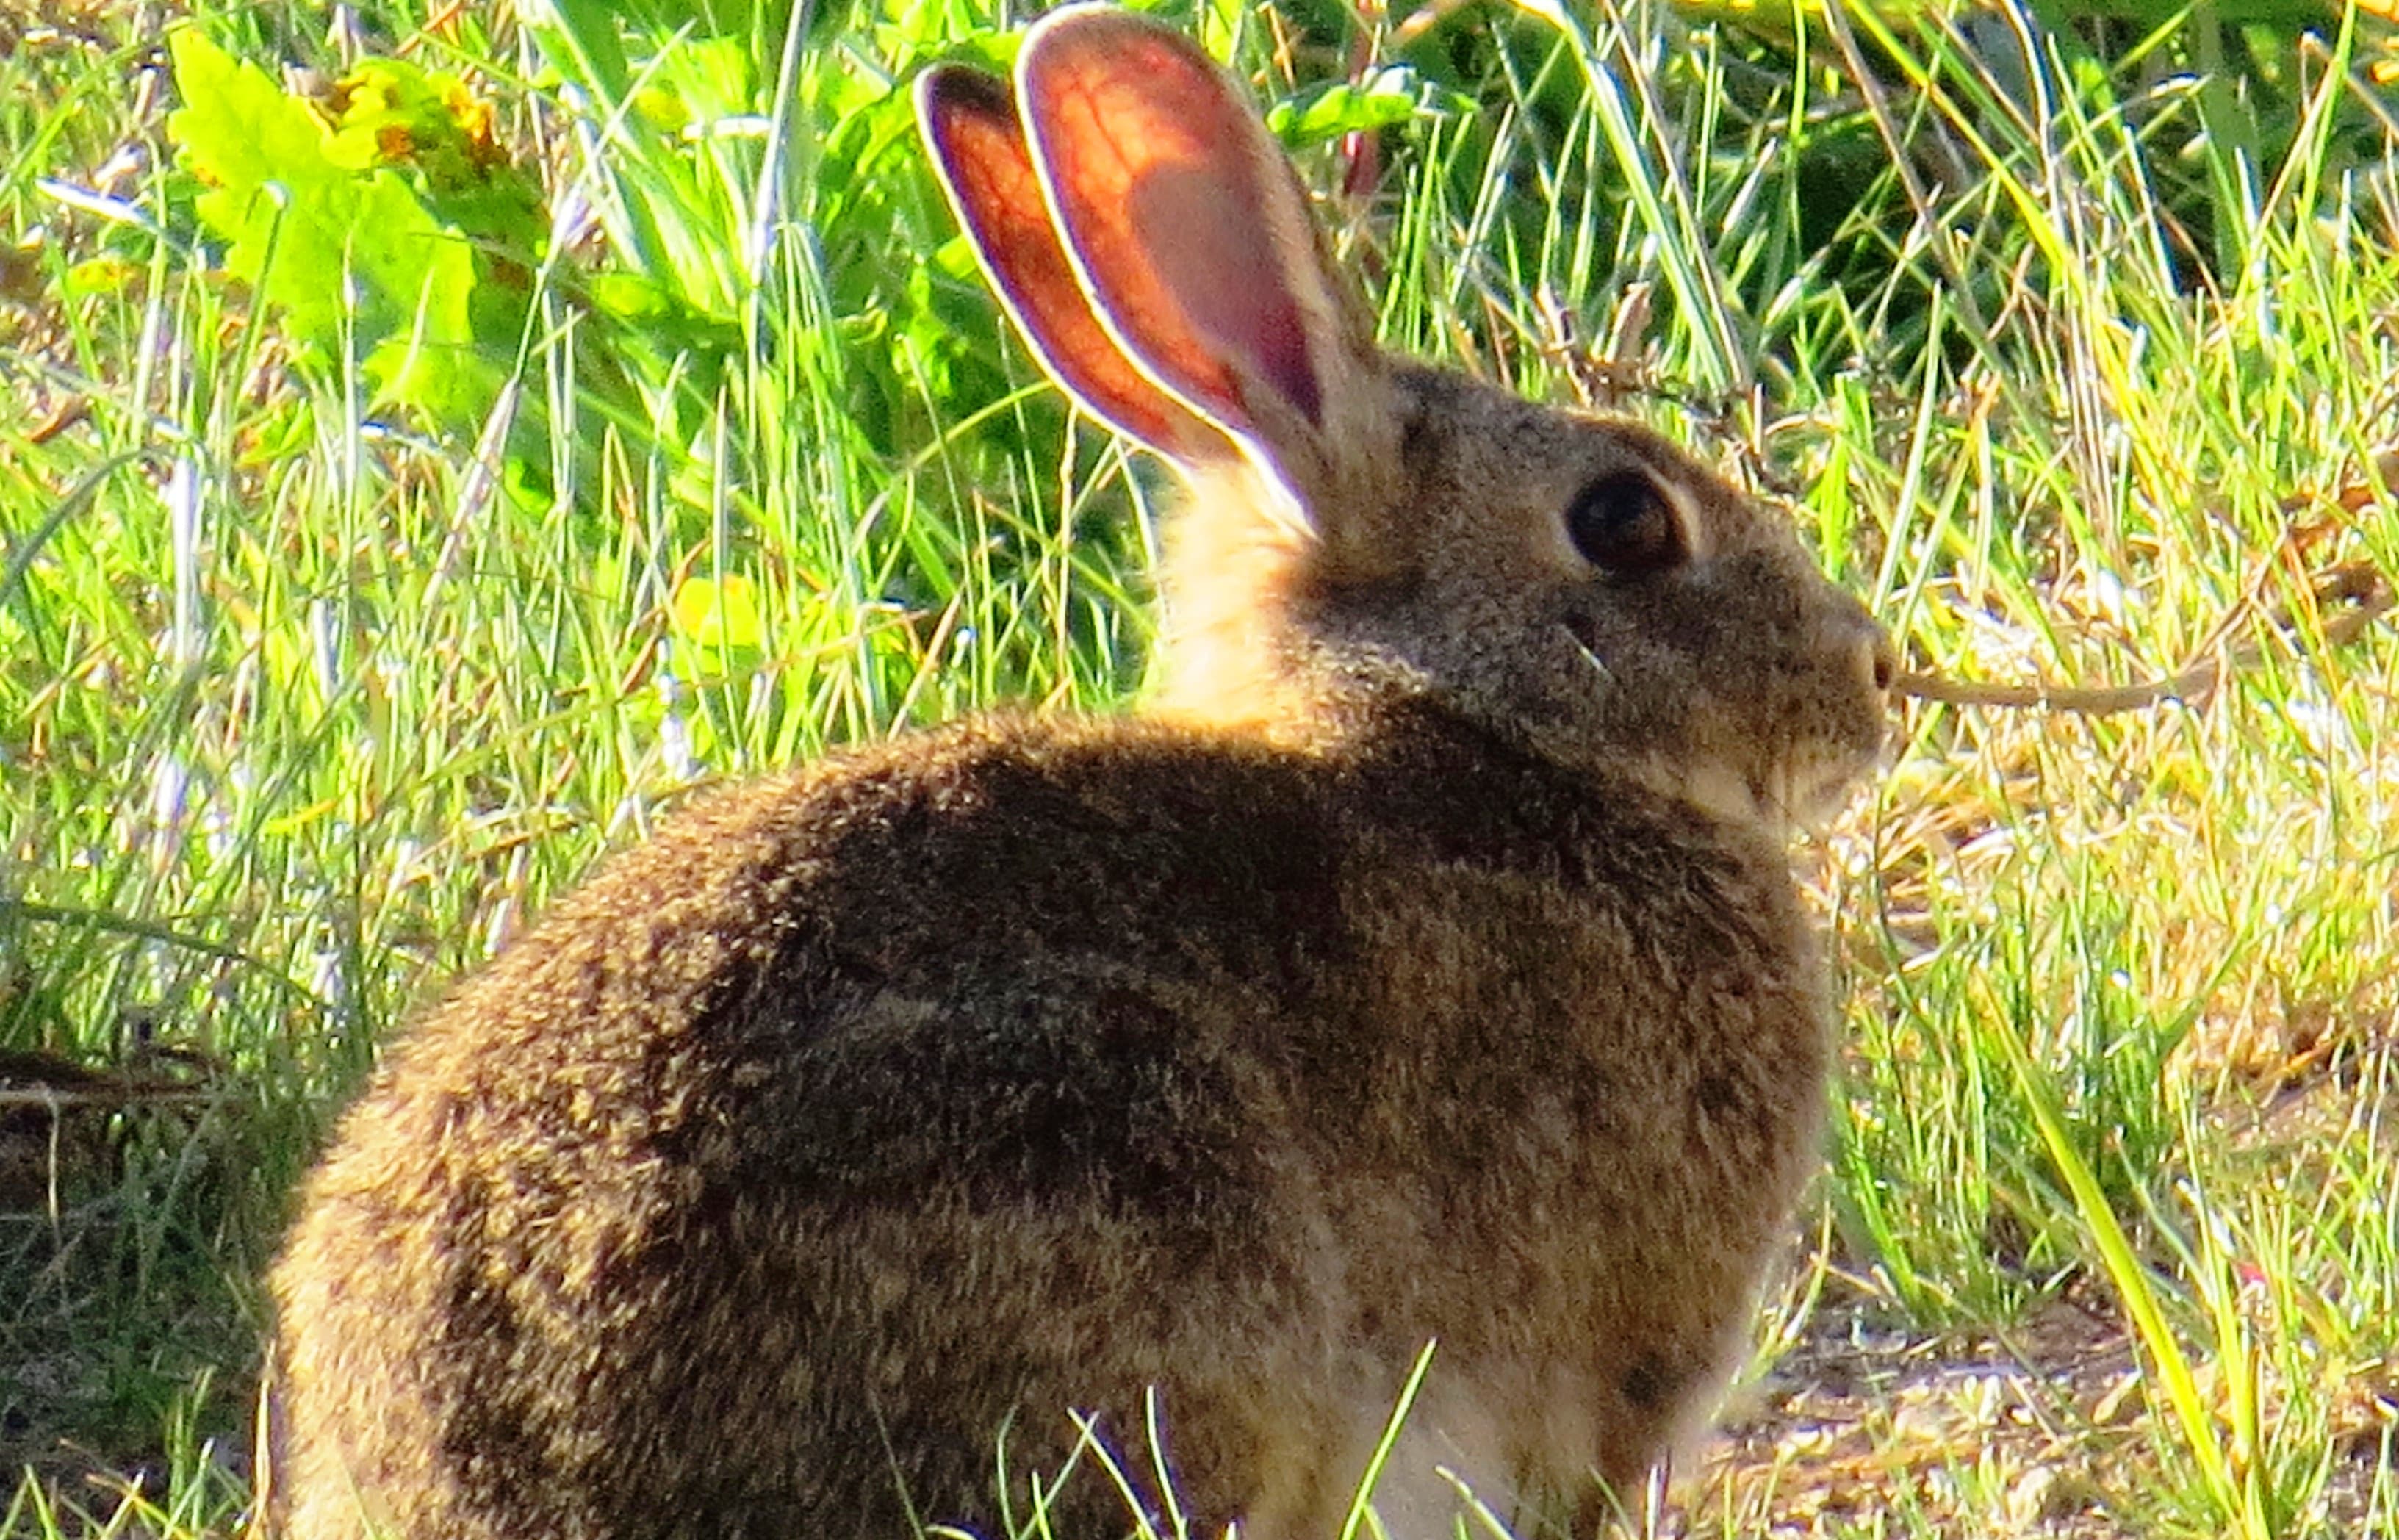 A file photo shows a rabbit in the grass in an unspecified part of New Zealand